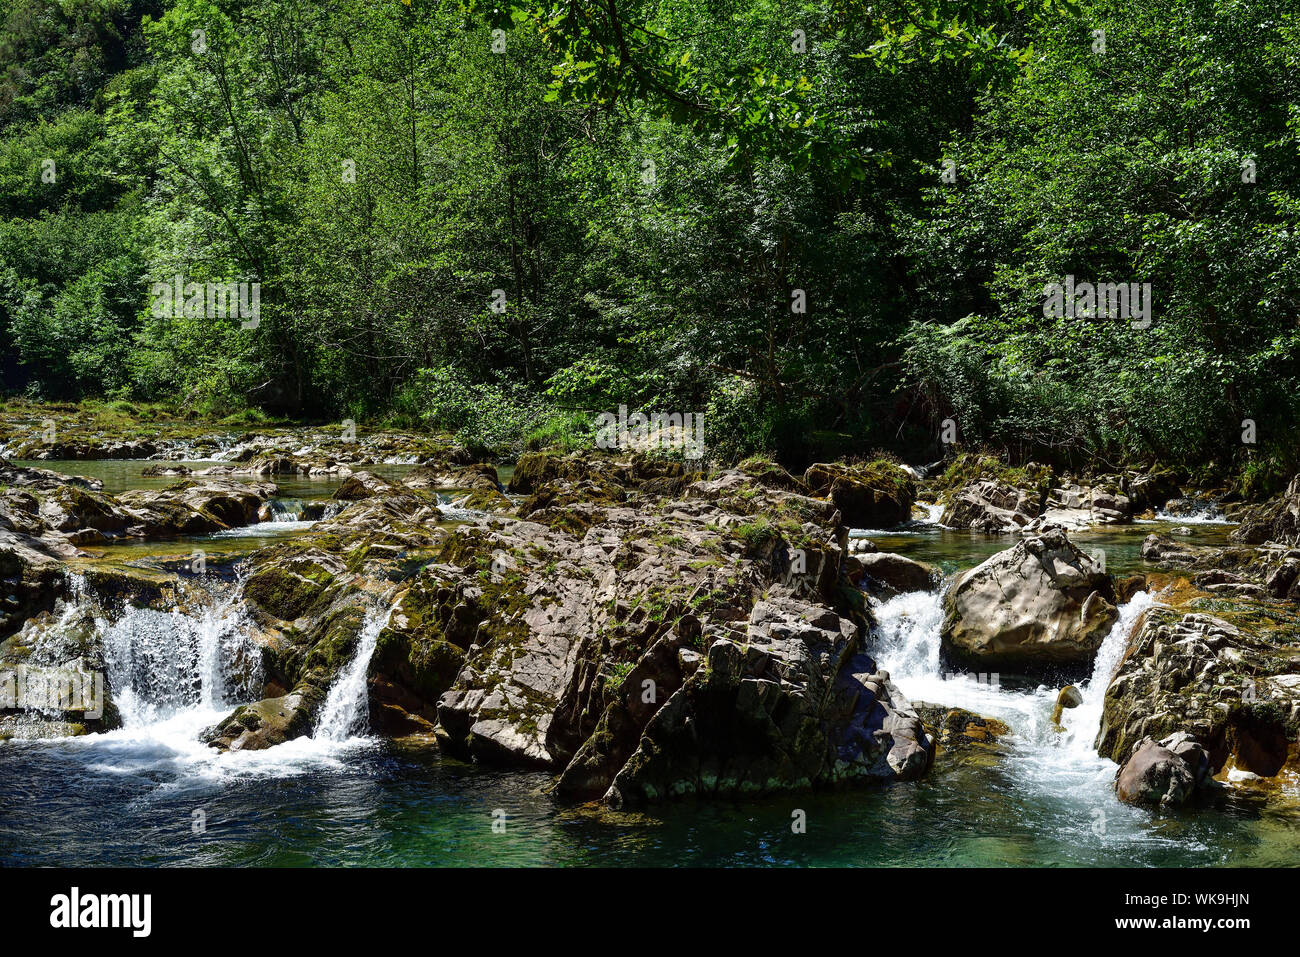 The miniature rapids just before the Olla San Vicente near Cangas de Onis, Asturias, northern Spain. Stock Photo